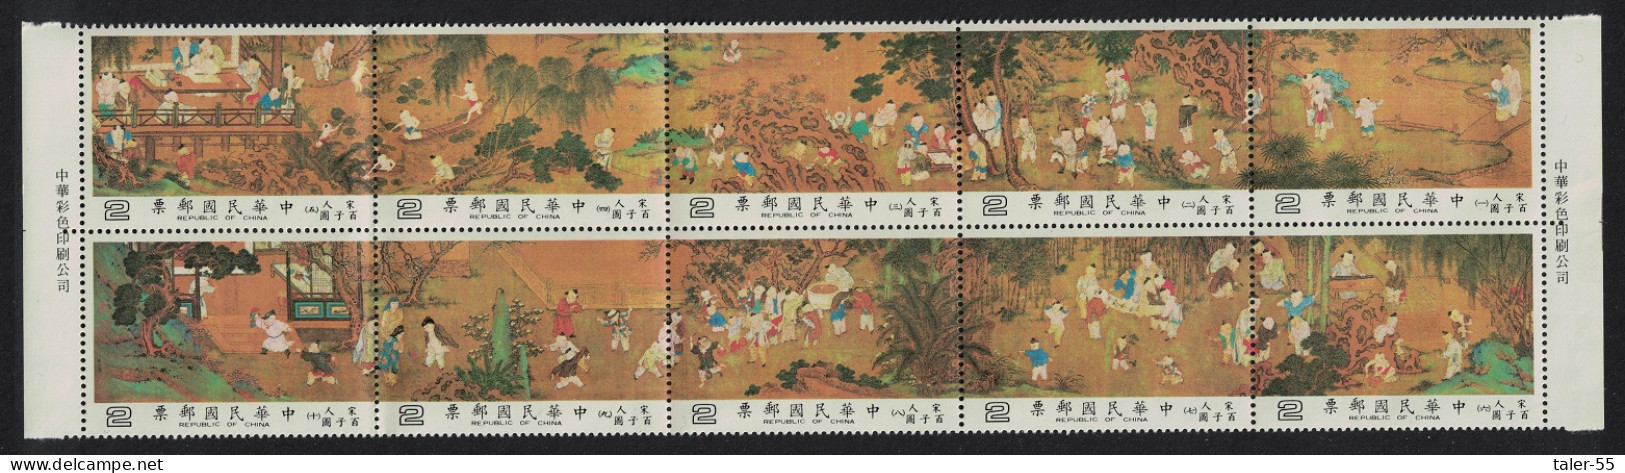 Taiwan Sung Dynasty Painting 'One Hundred Young Boys' 10v T2 1981 MNH SG#1403-1412 - Nuovi